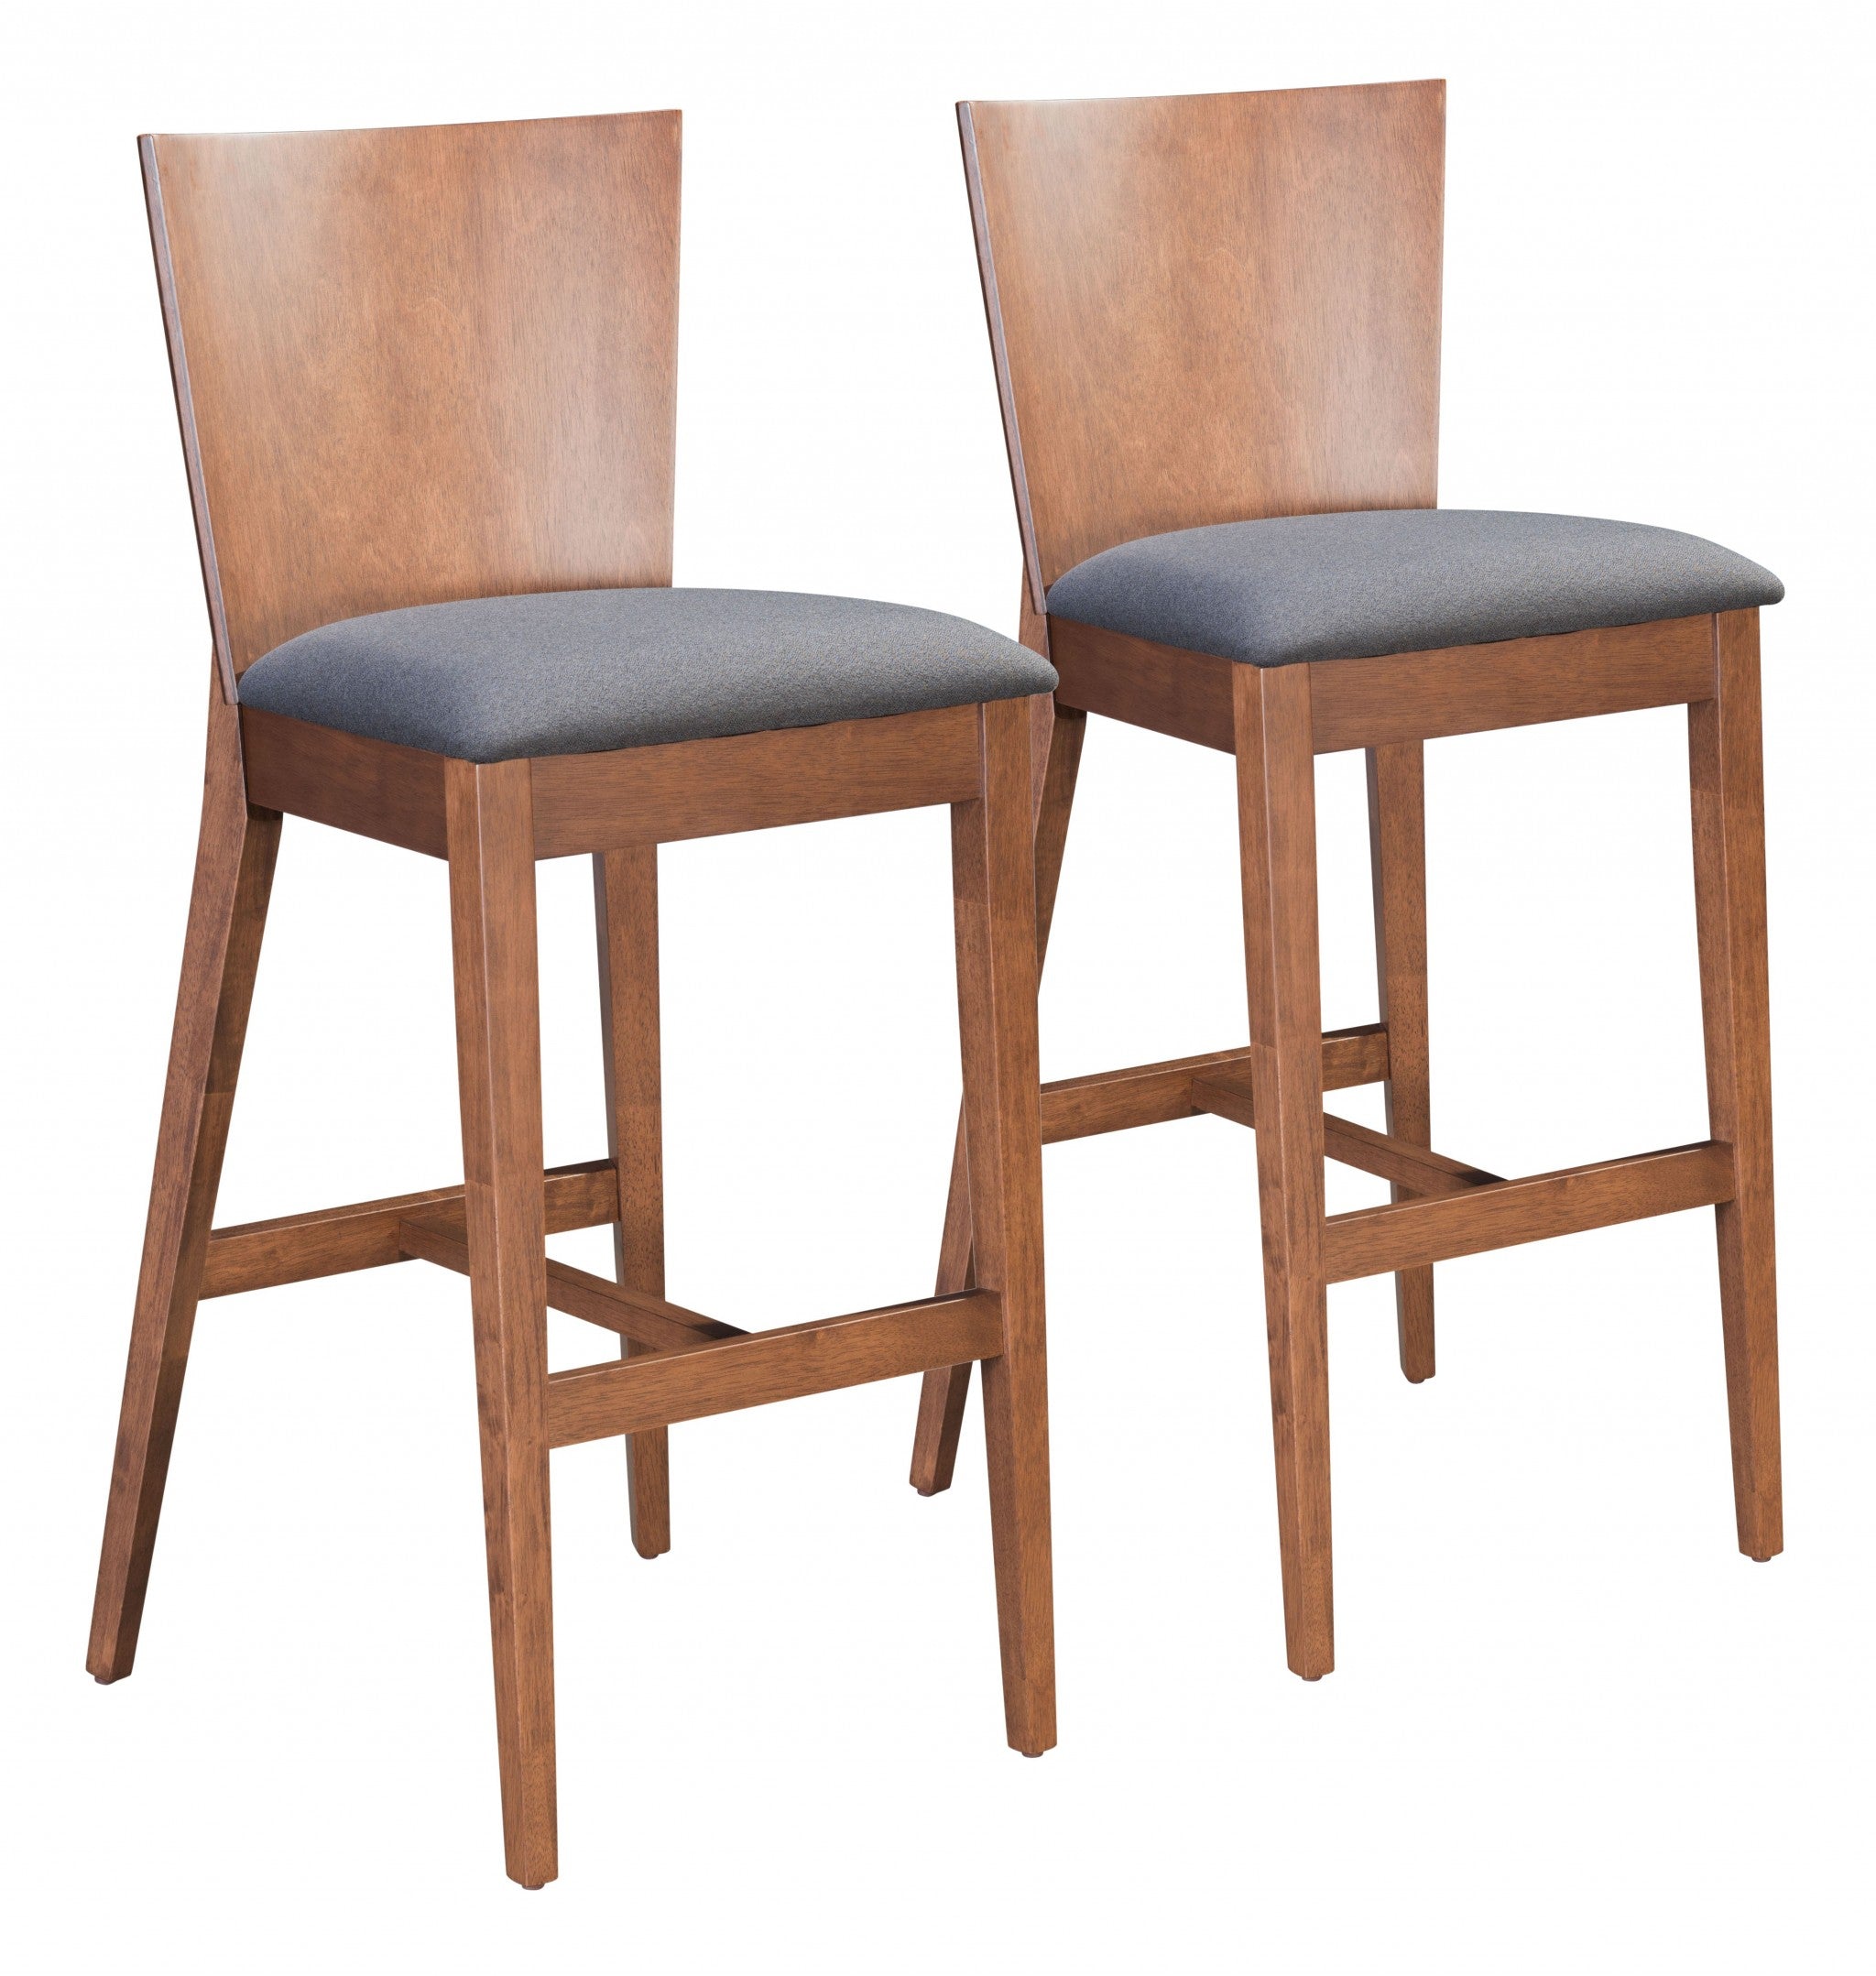 Set of Two 29" Gray And Brown Solid Wood Low Back Bar Height Bar Chairs